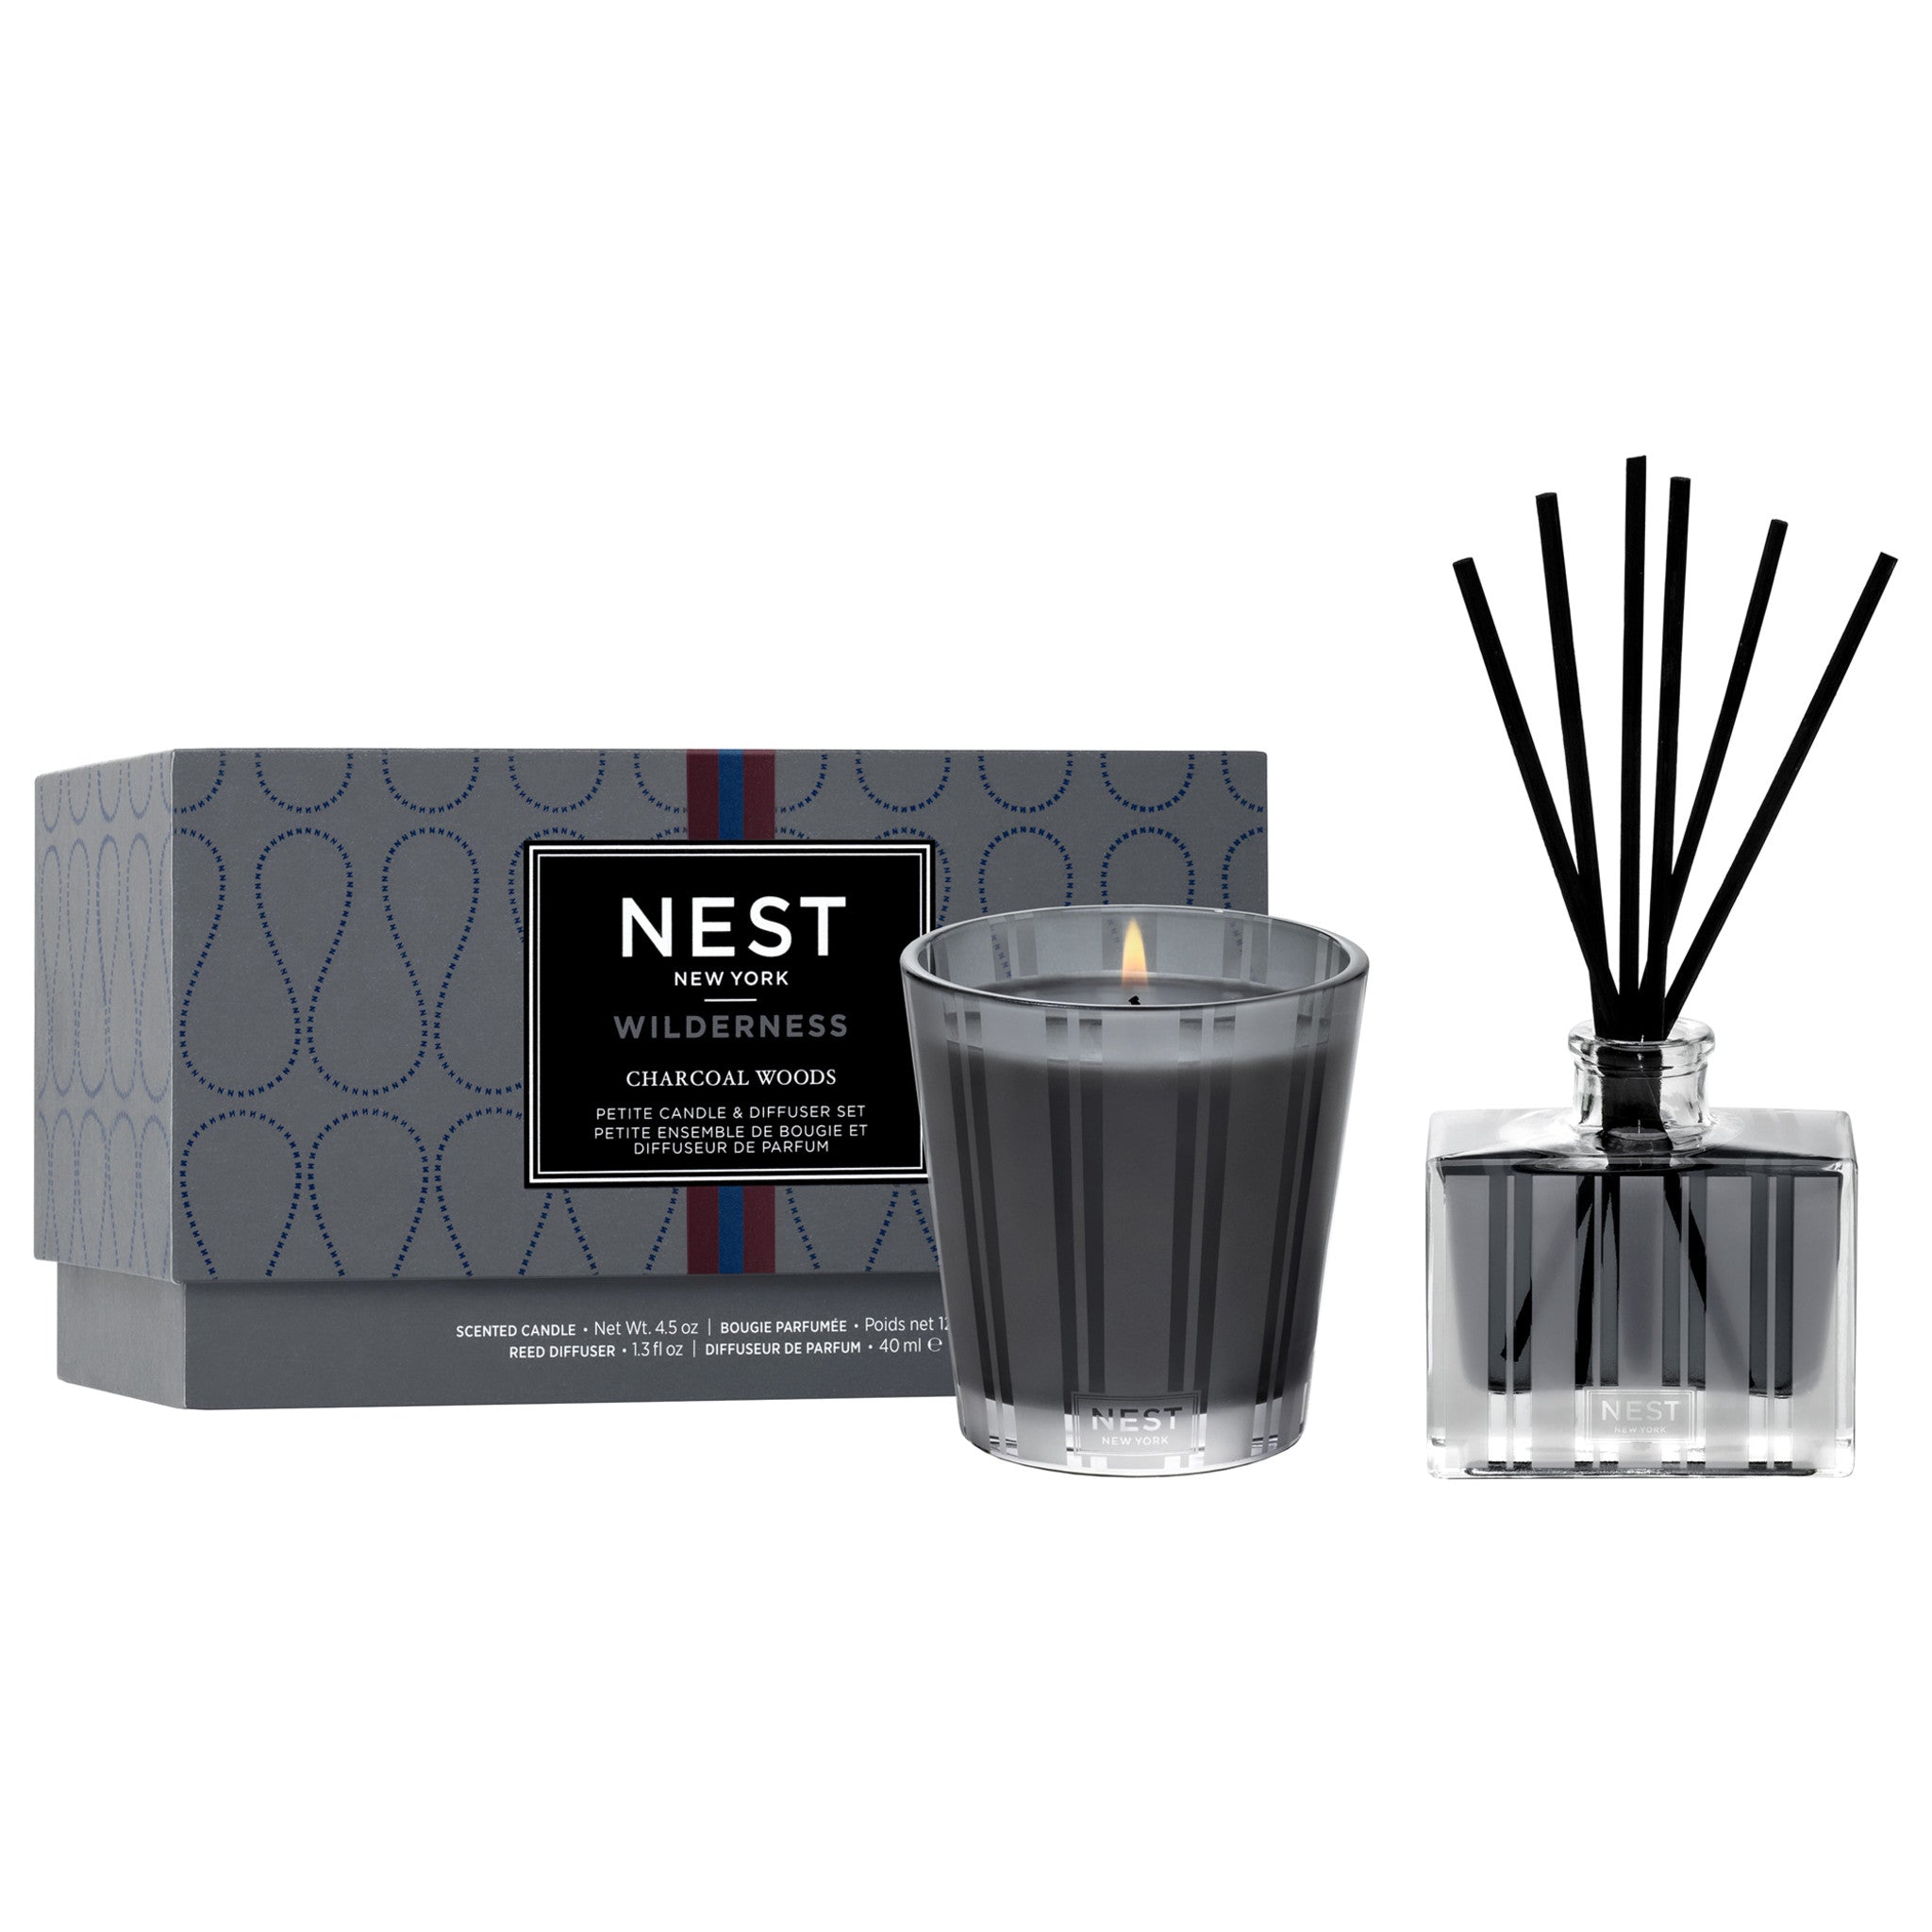 Nest Charcoal Woods Petite Candle & Diffuser main image.